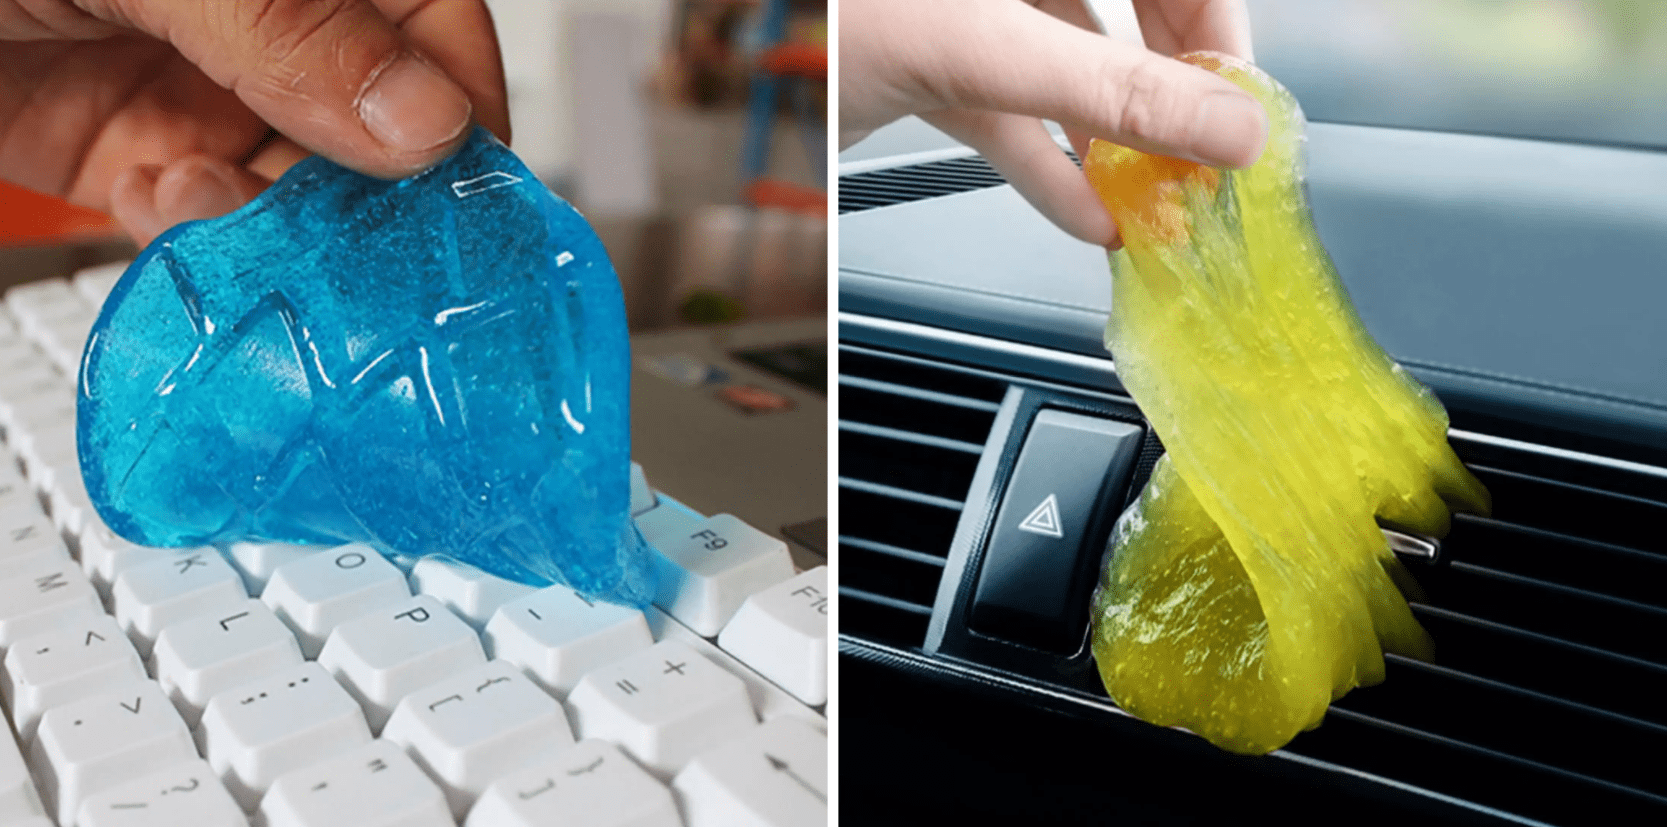 Portable surface cleaning gel